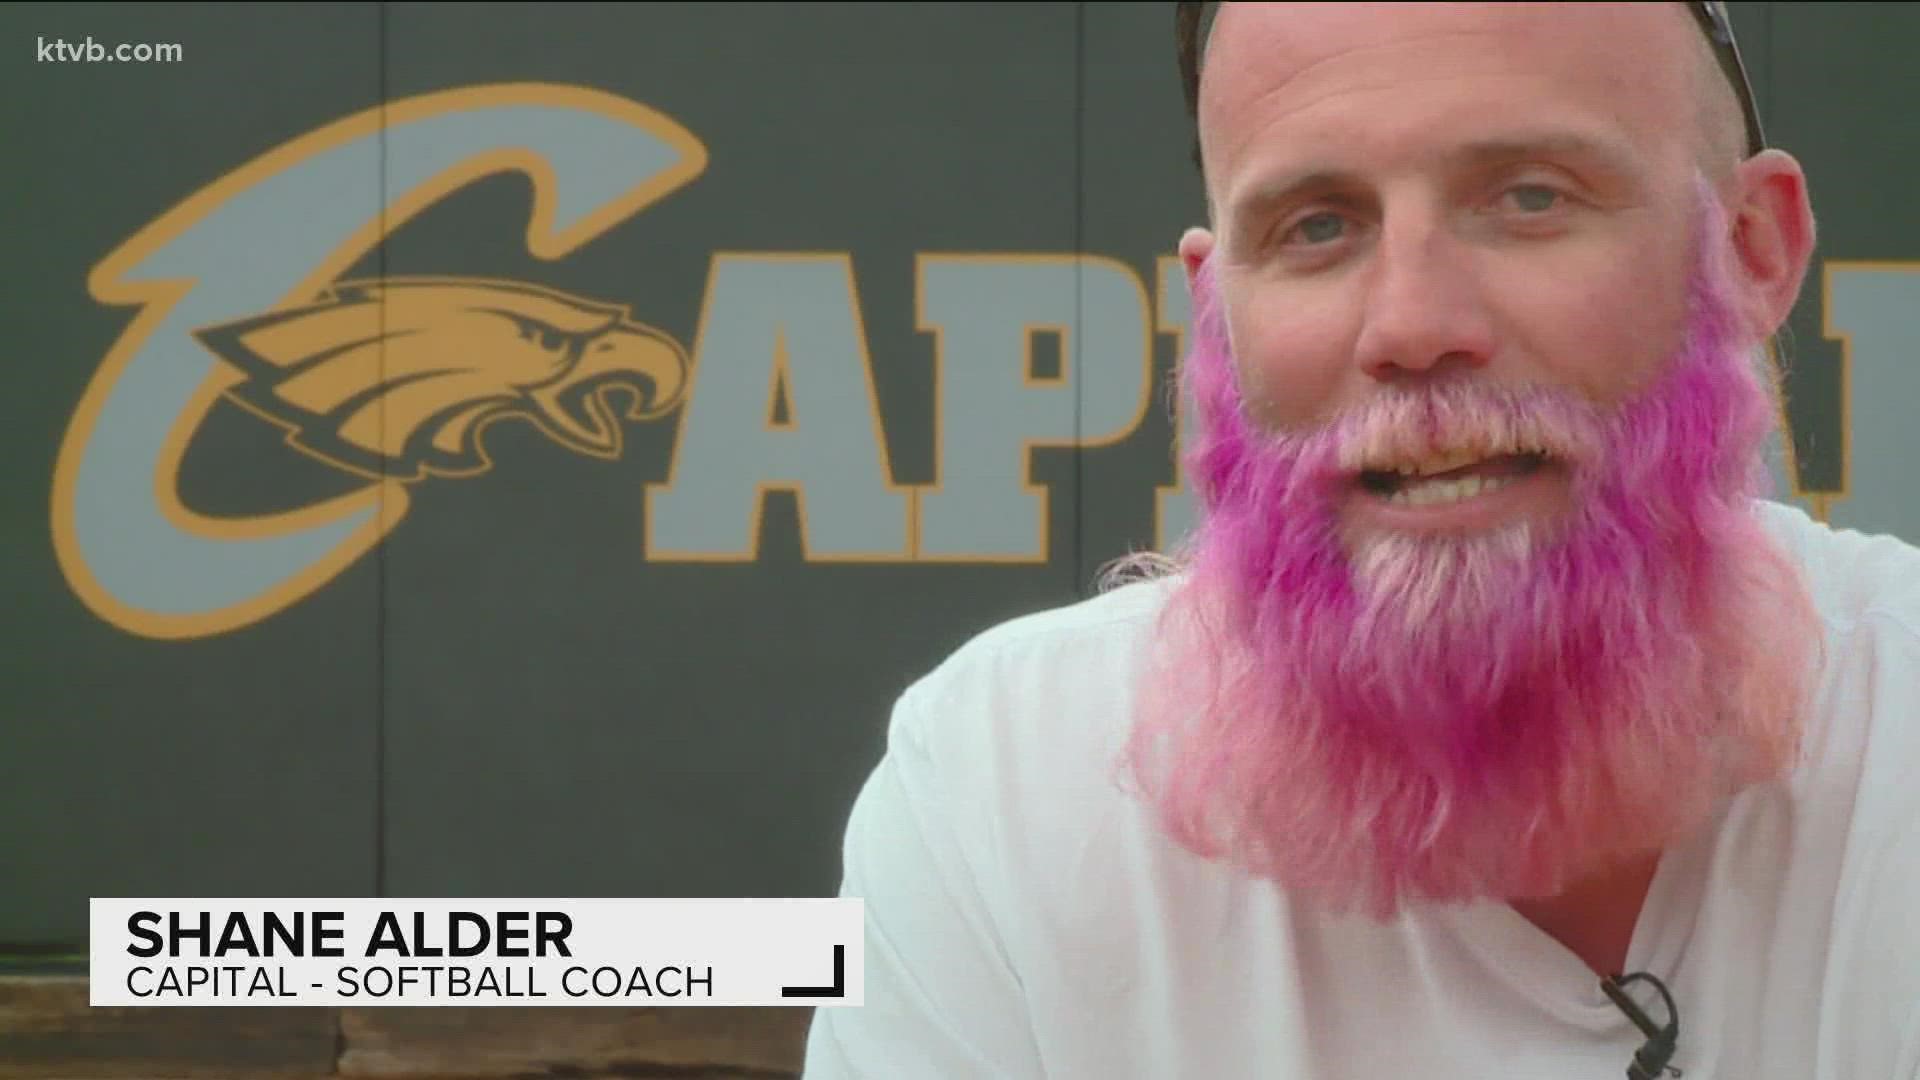 'Fear the Beard' Capital softball team propelled by an unlikely motto